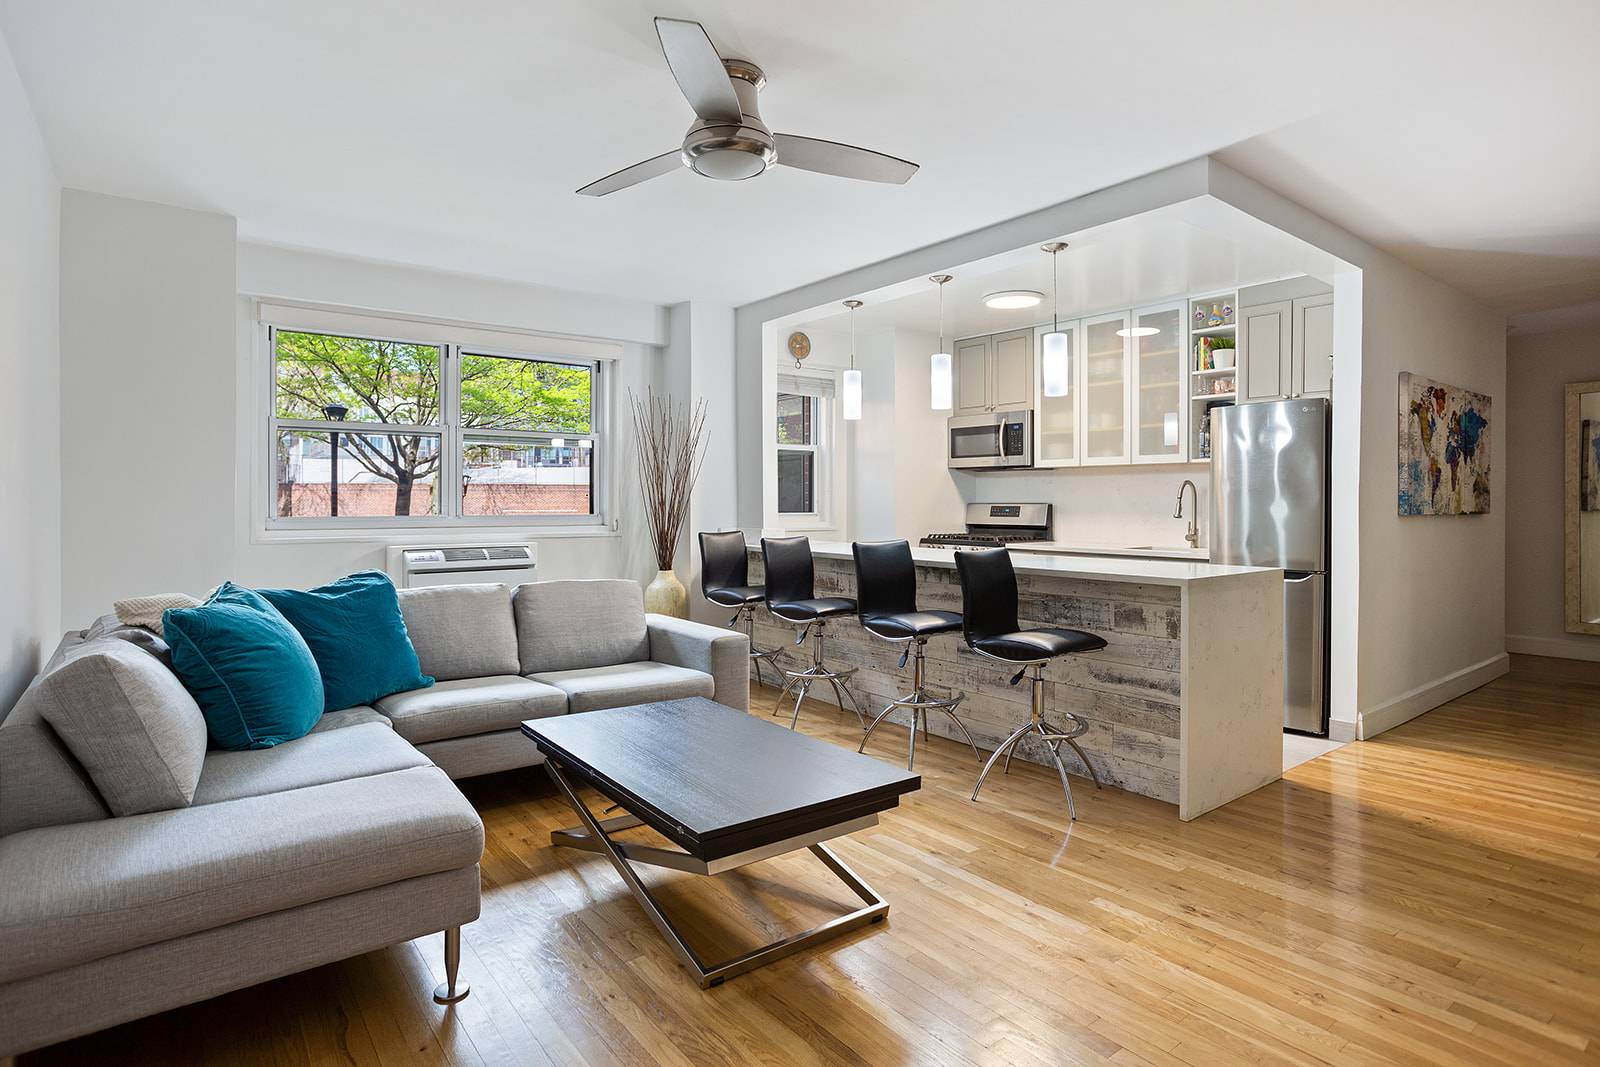 Fabulous renovated oversize 1 bedroom apartment in desirable Fort Greene.